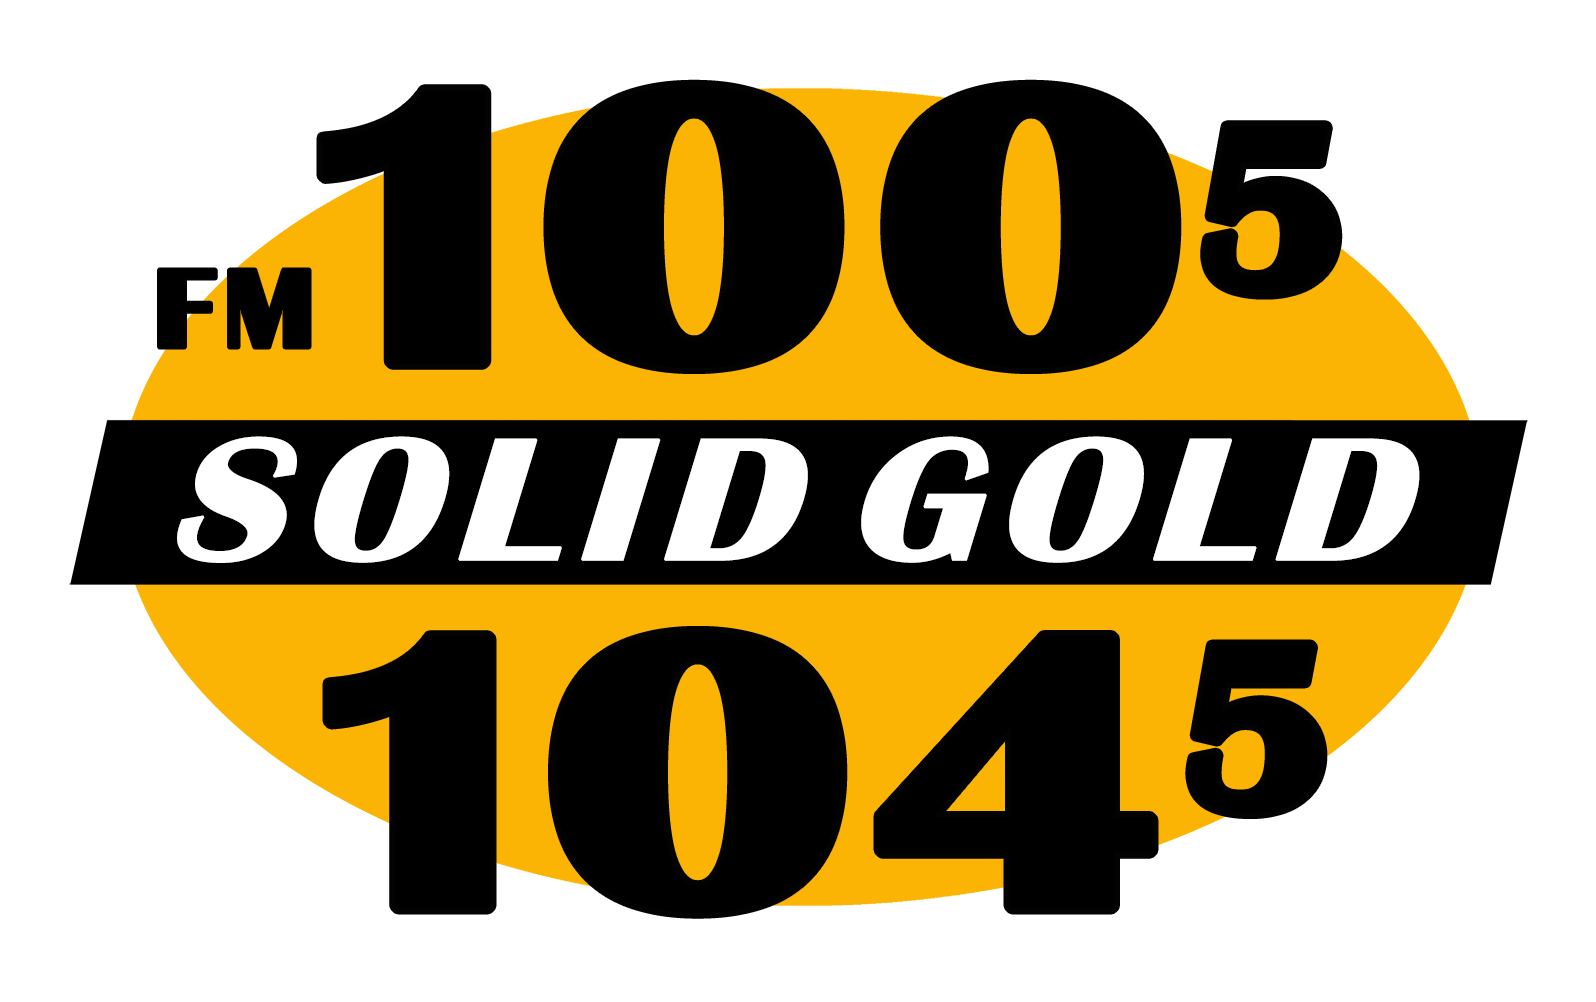 SolidGold 100.5/104.5